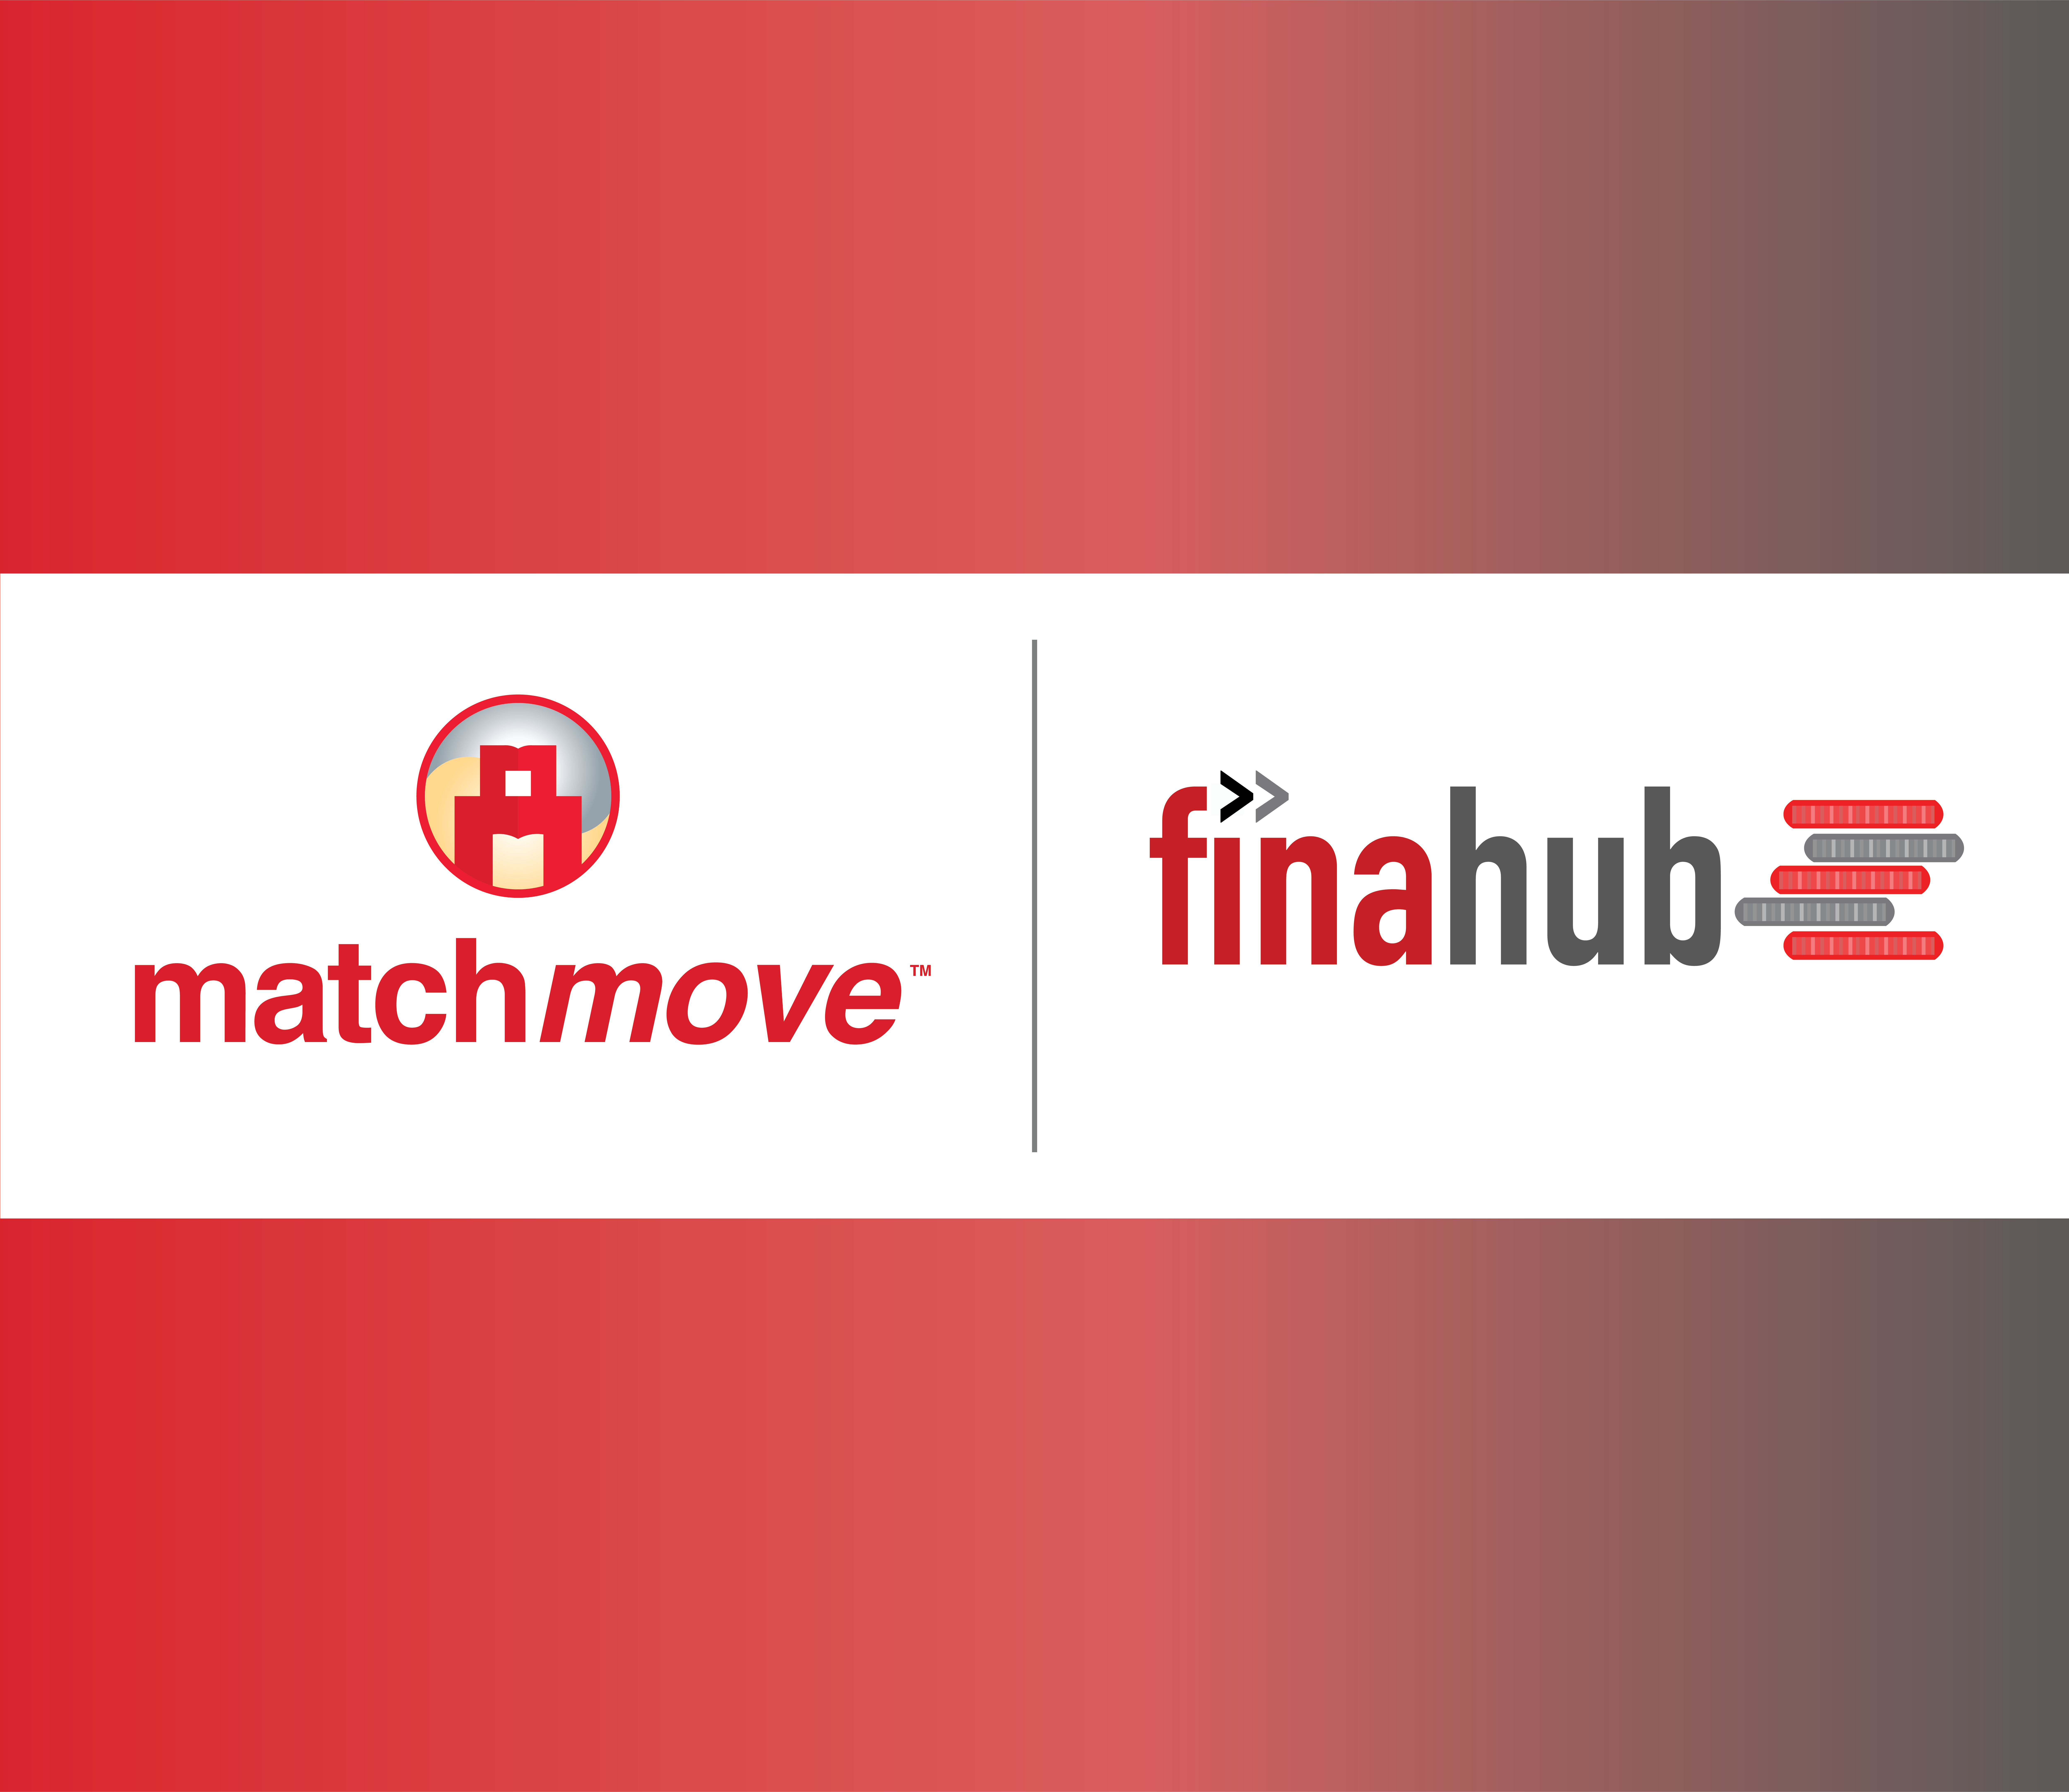 Finahub selects MatchMove to enable Gold-backed lending solutions for NBFCs